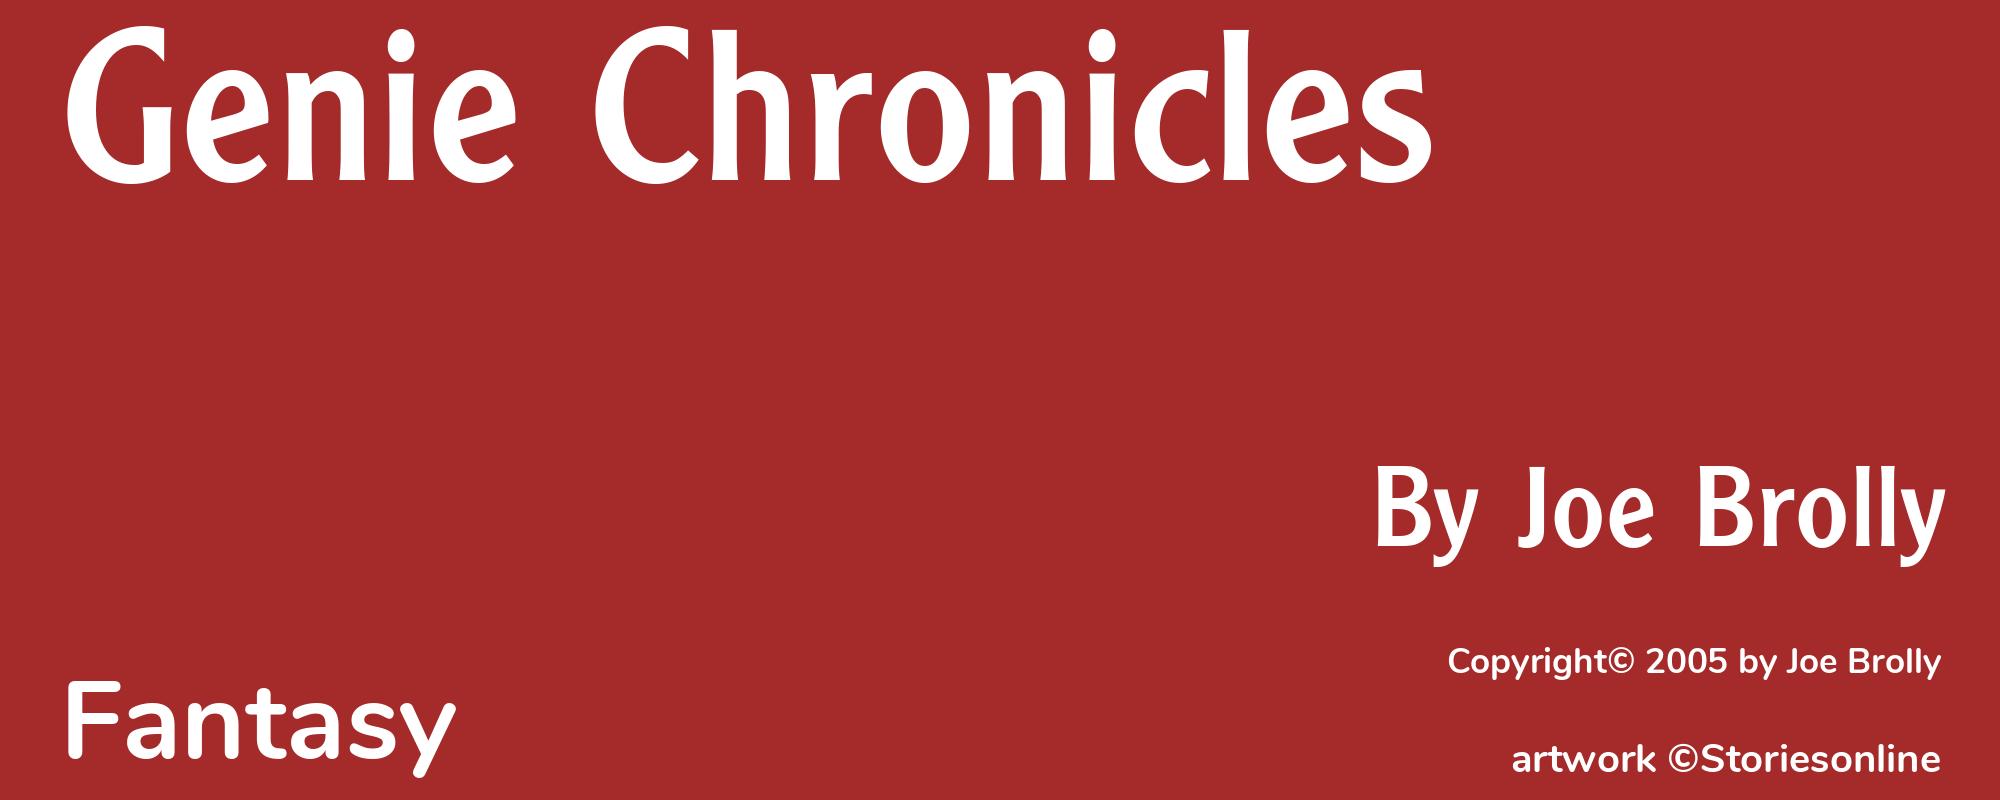 Genie Chronicles - Cover